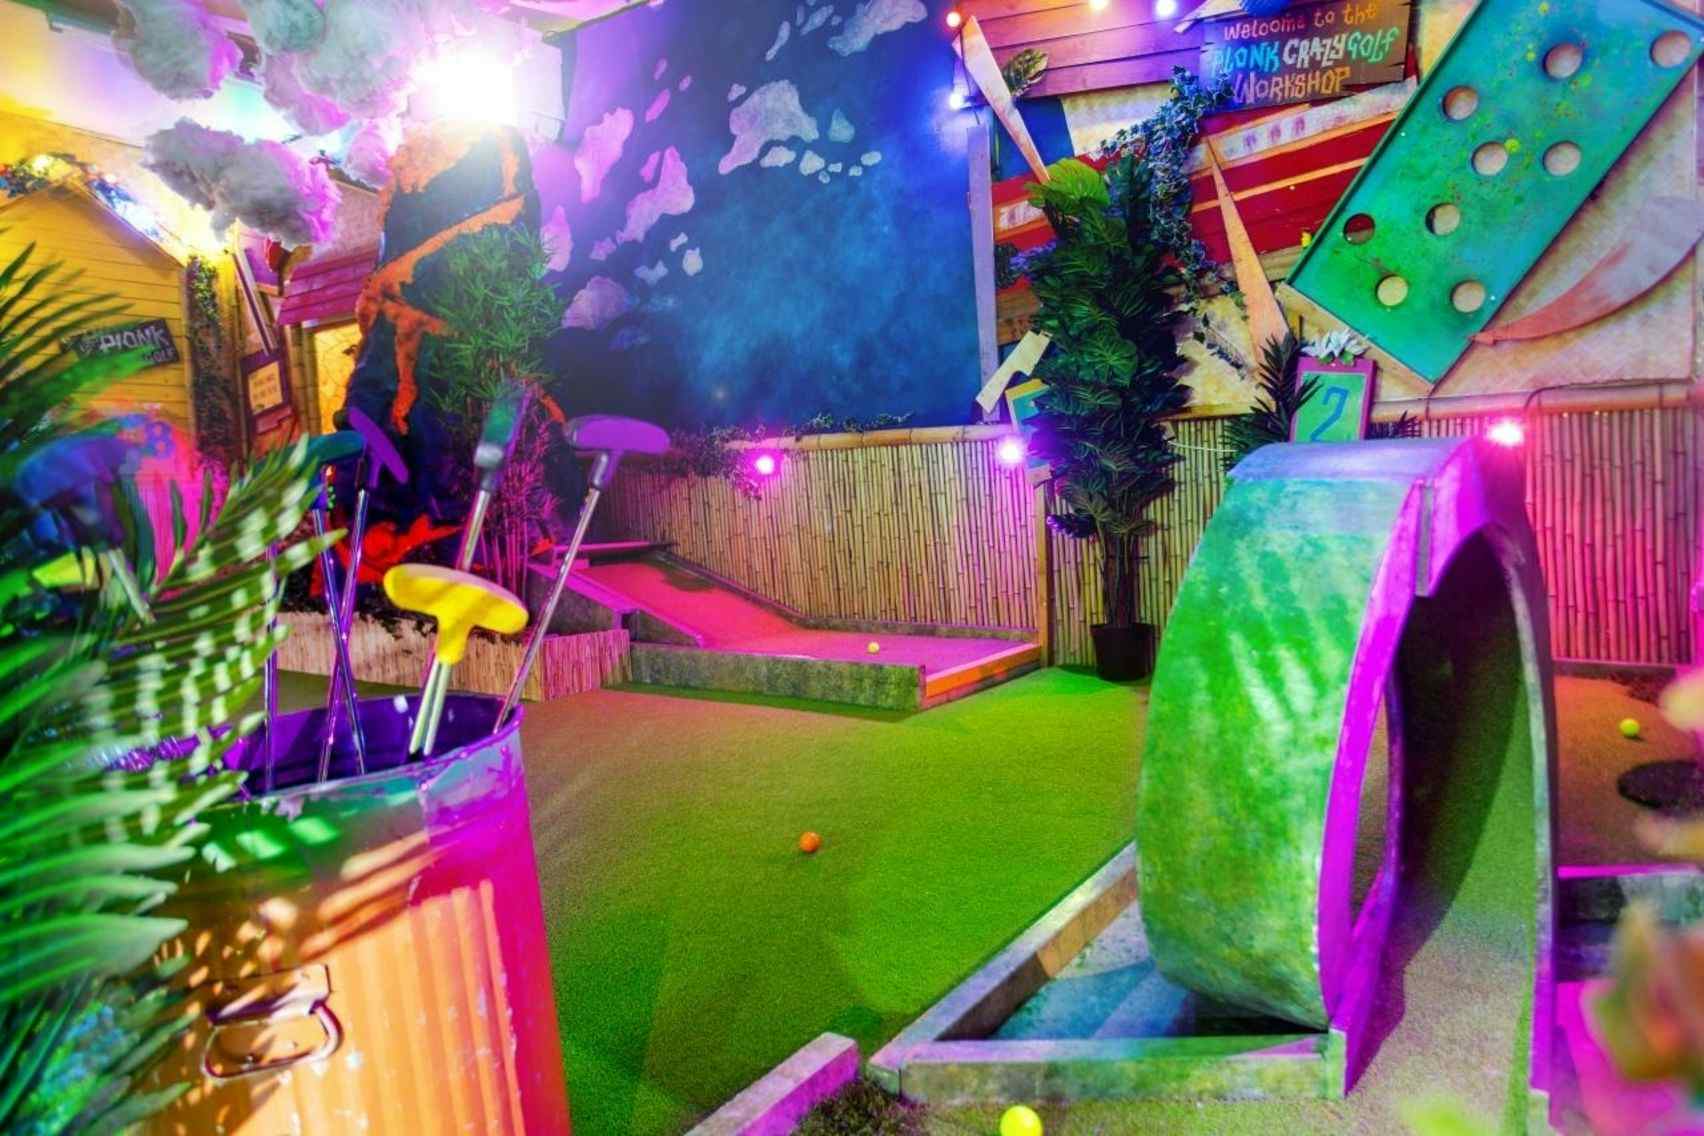 The Whole Course, Plonk Crazy Golf Shoreditch